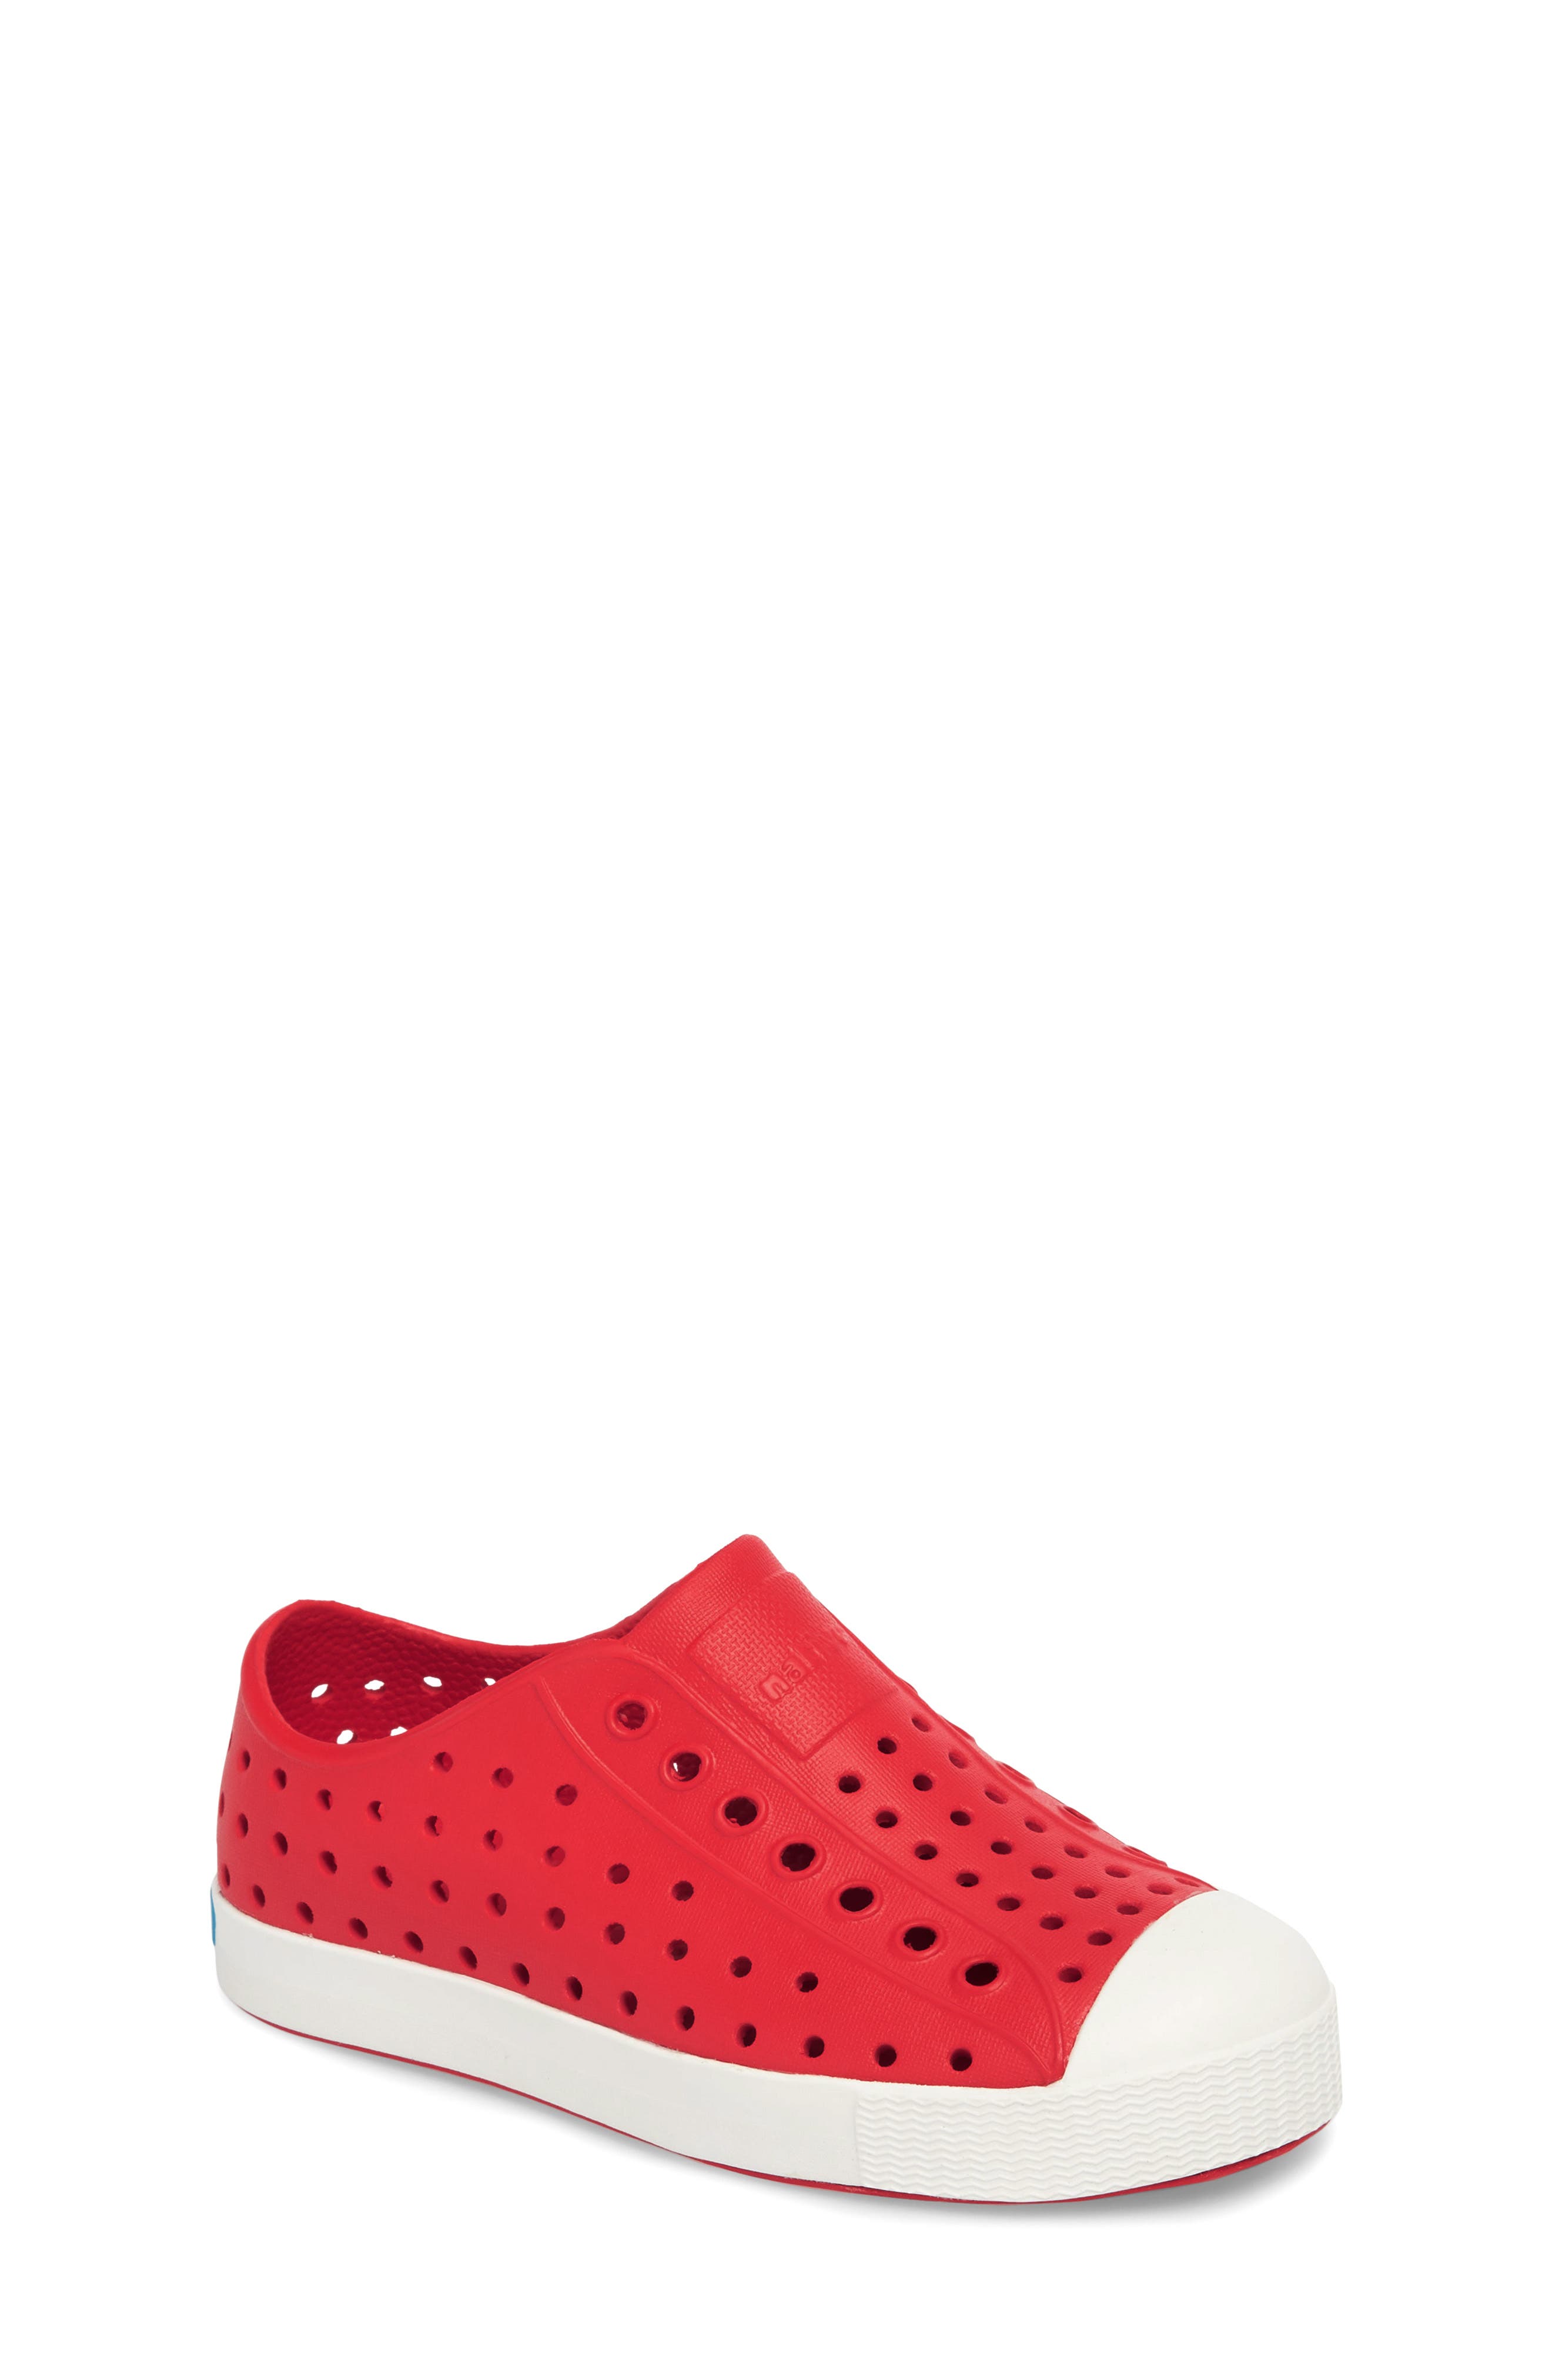 girls red shoes size 3